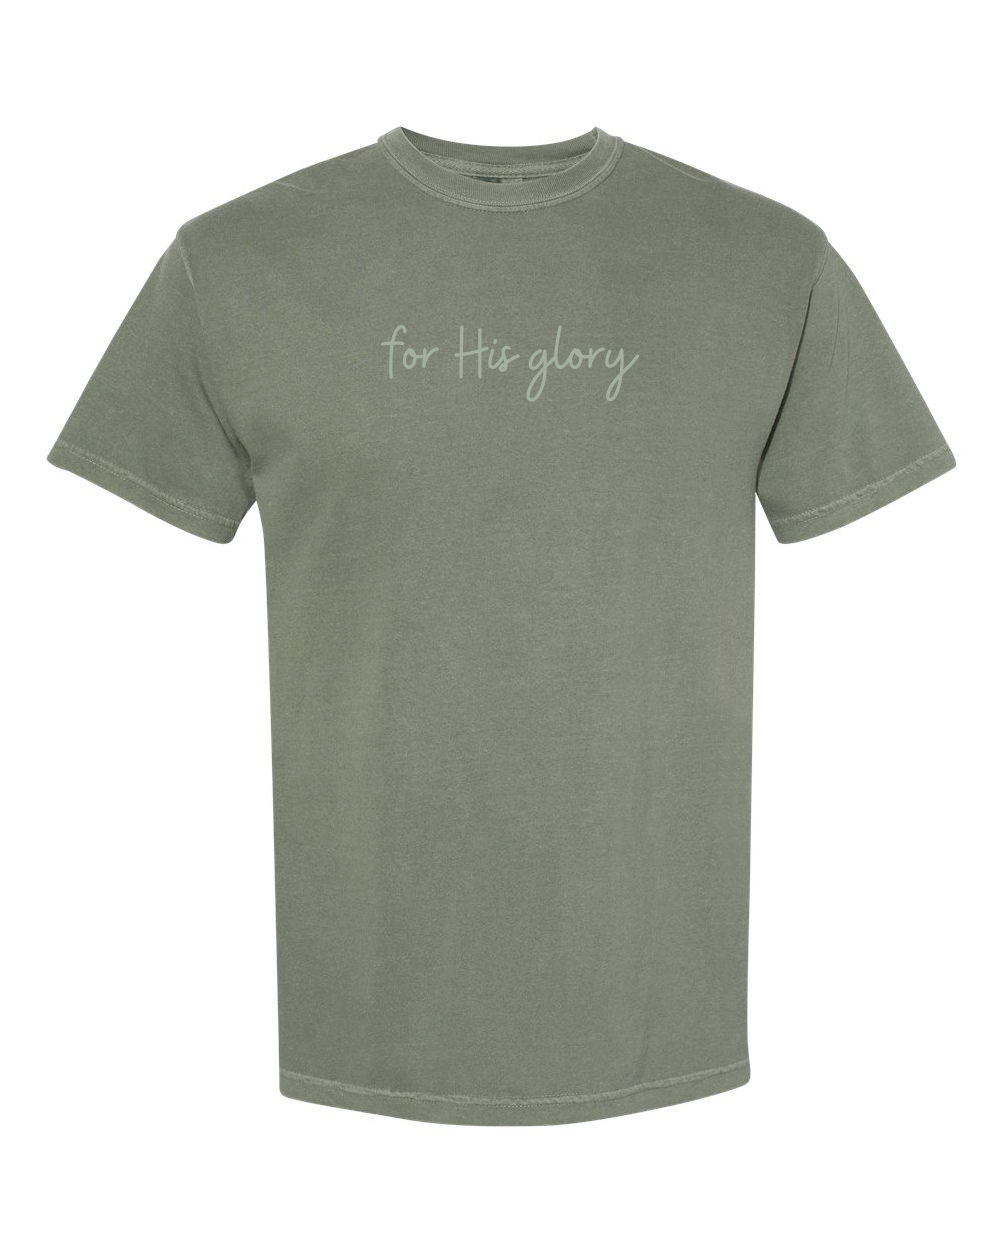 CUSTOMS - FOR HIS GLORY TEES